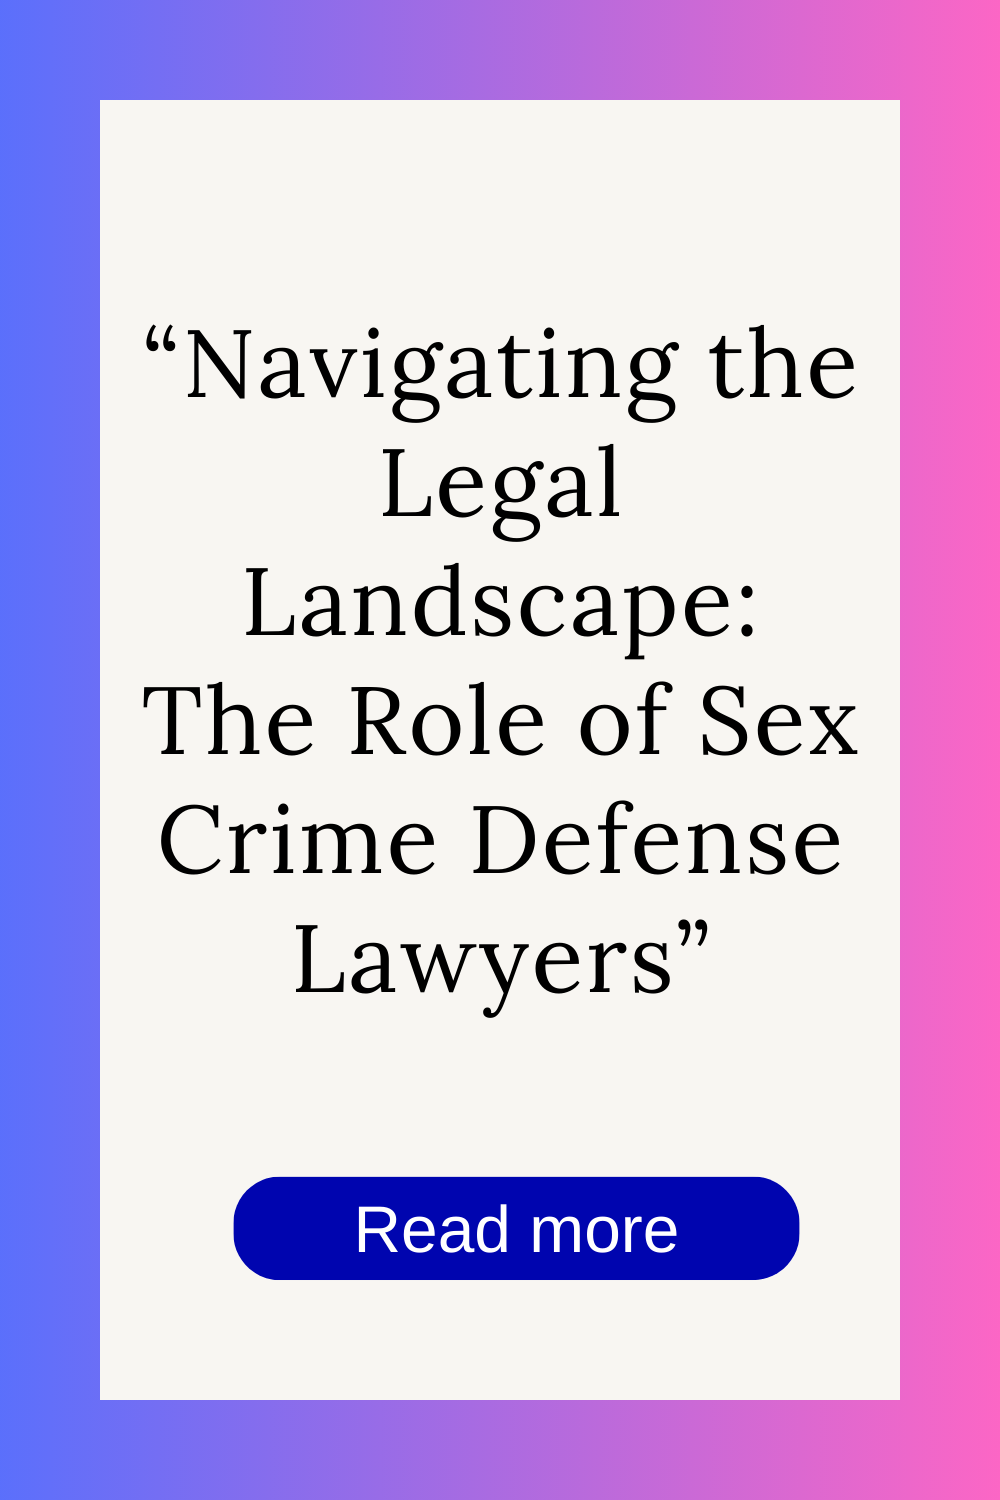 Defending Rights, Upholding Dignity: The Work of Sex Crime Defense Attorneys